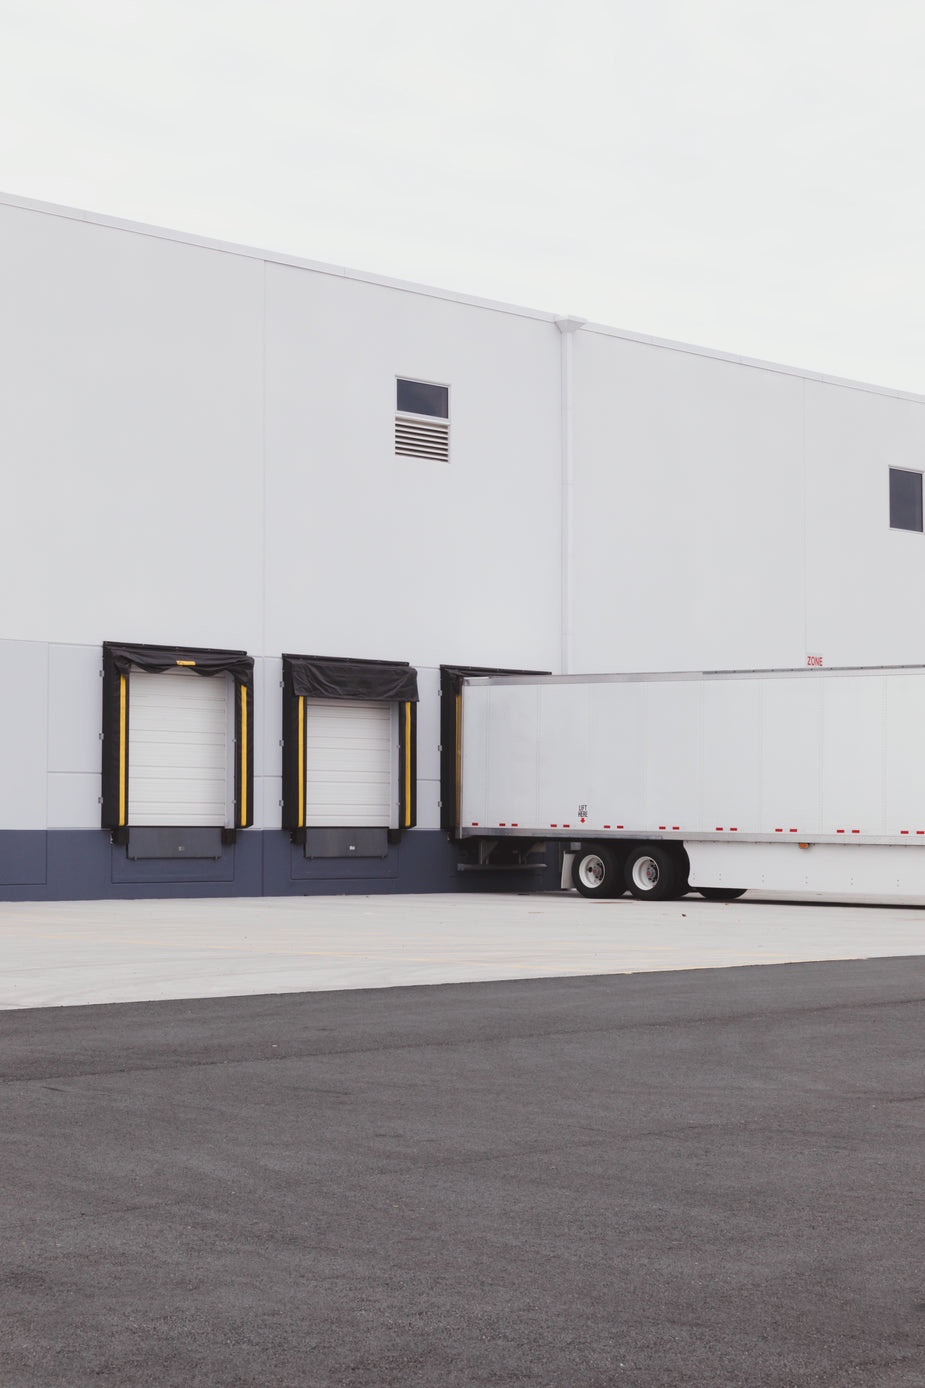 How to choose the best 3PL Cross-Docking Services